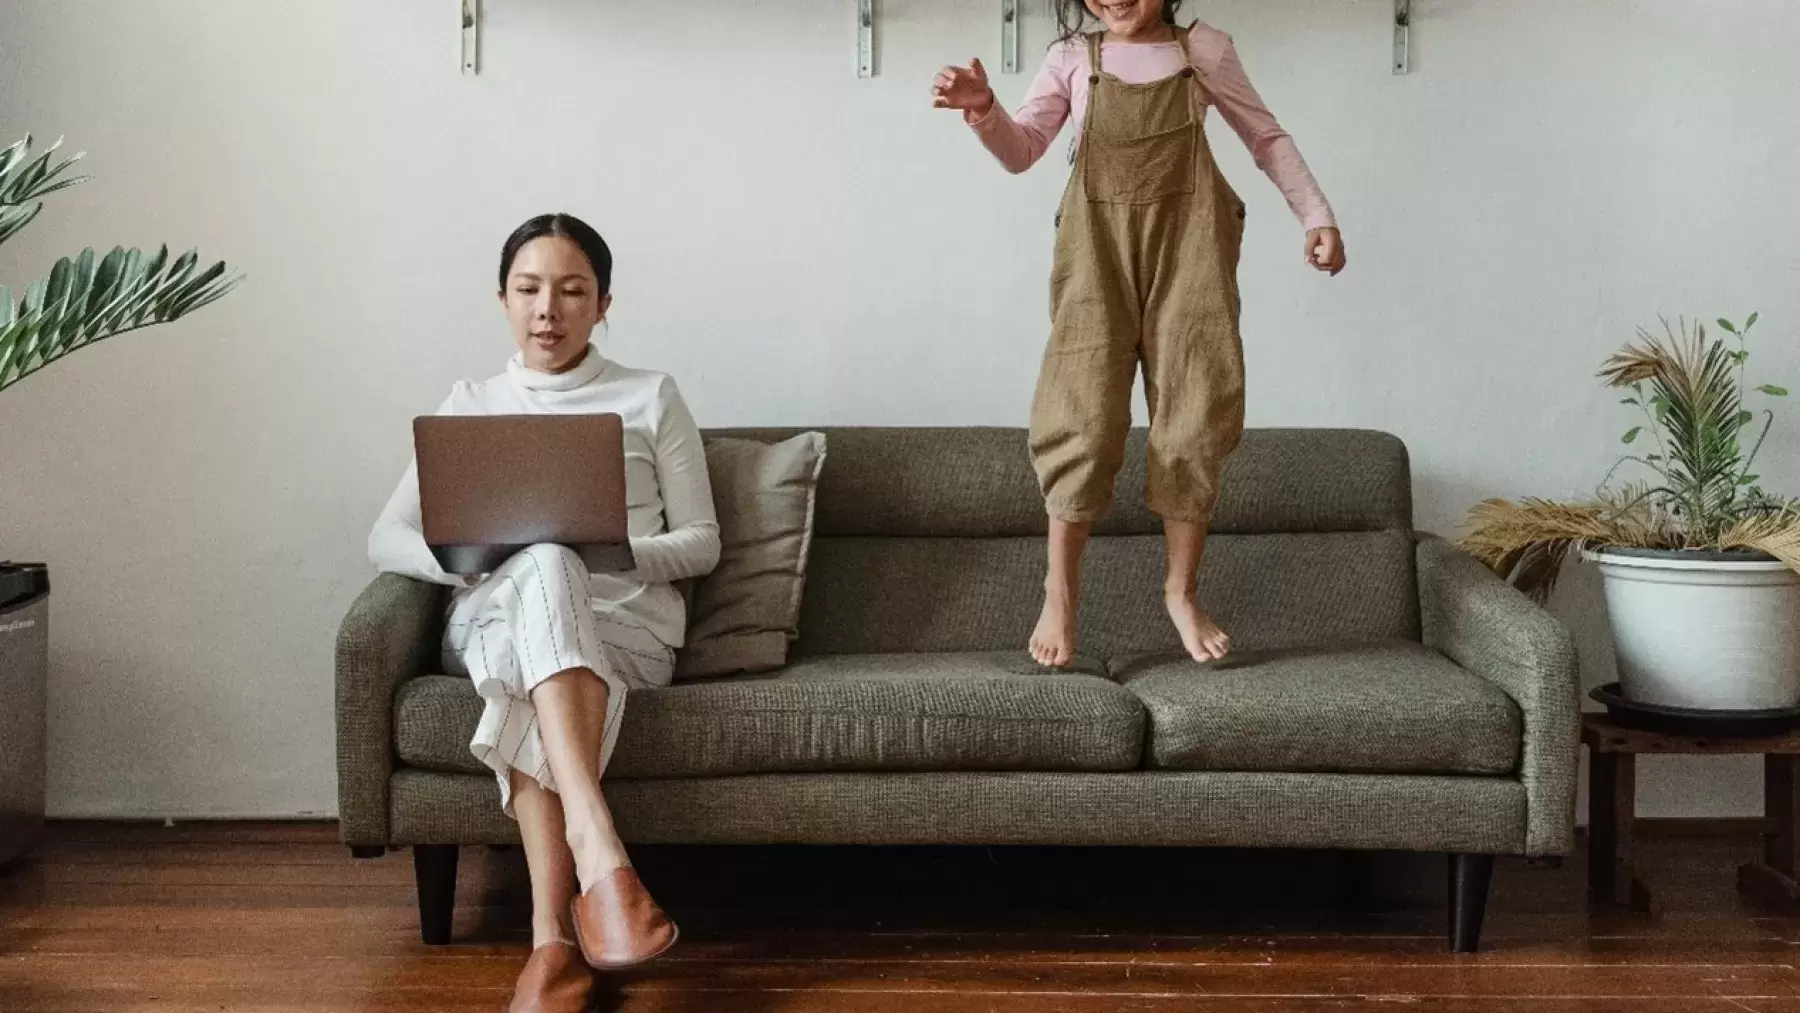 A woman on her laptop working with a child jumping next to her on the couch.